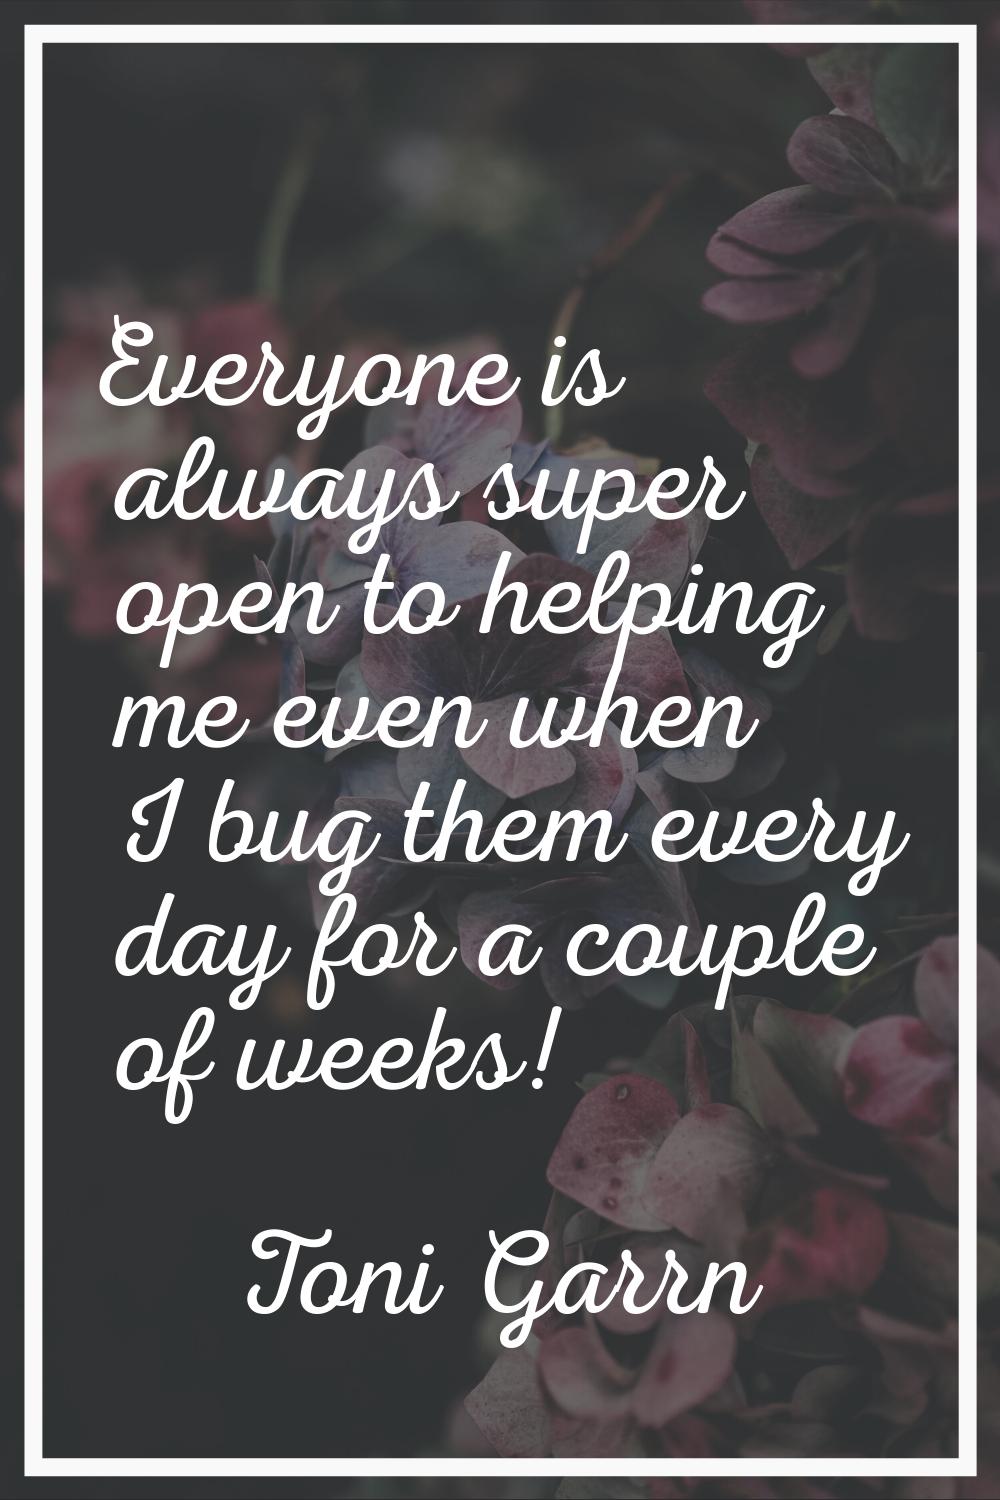 Everyone is always super open to helping me even when I bug them every day for a couple of weeks!